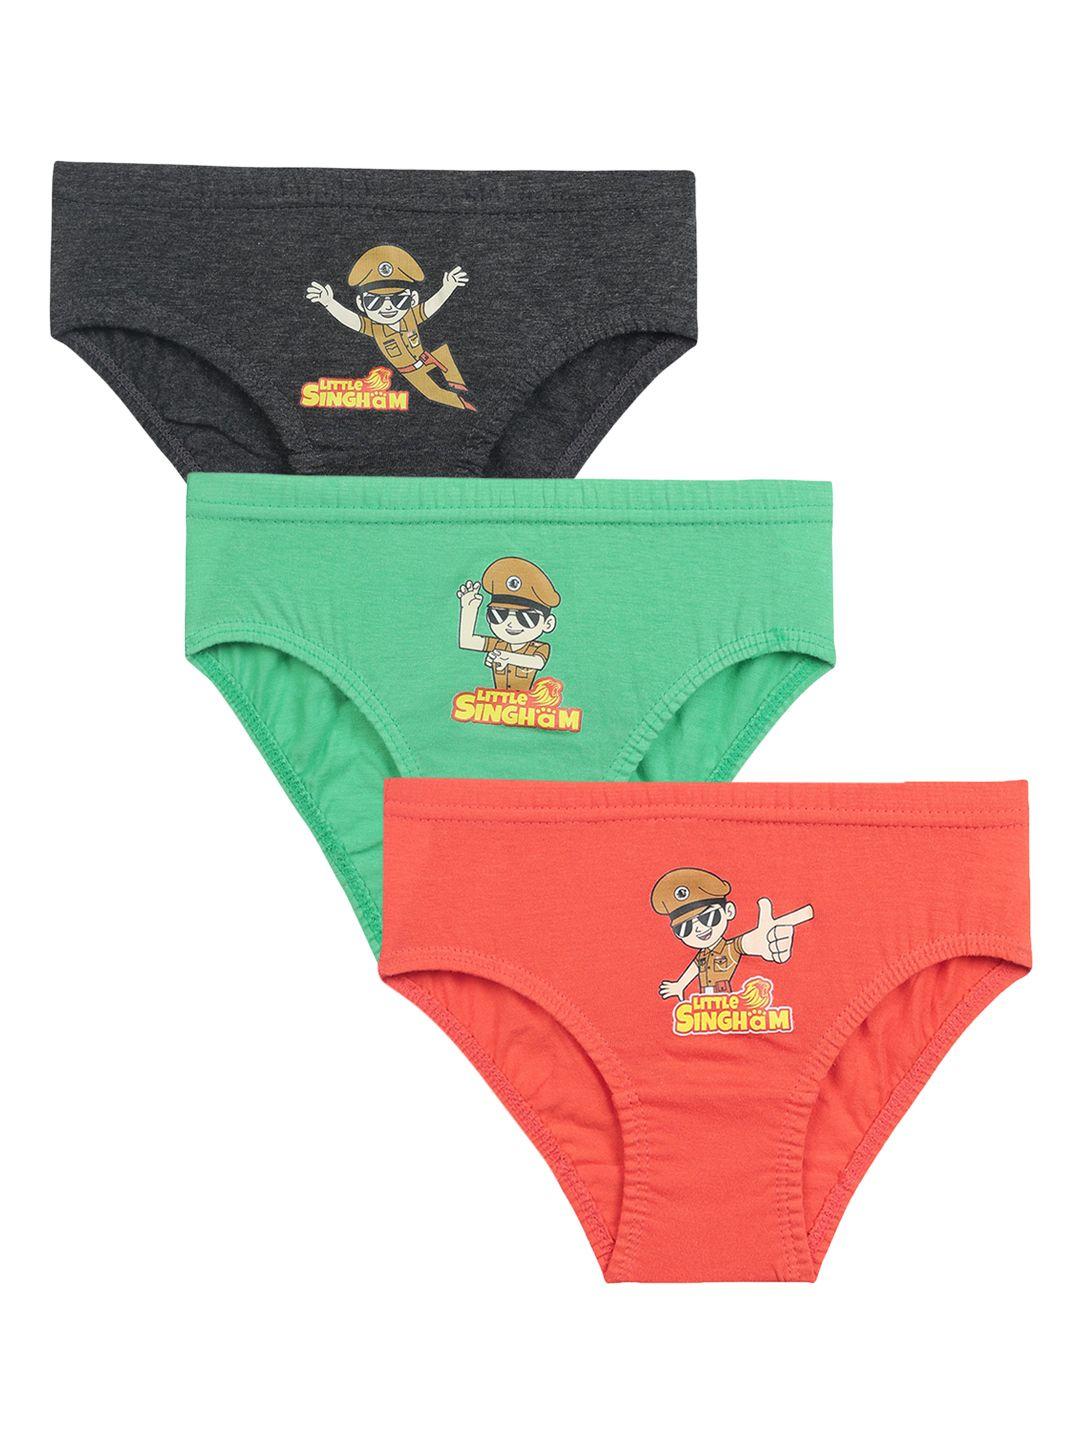 bodycare kids boys pack of 3 assorted cotton basic briefs